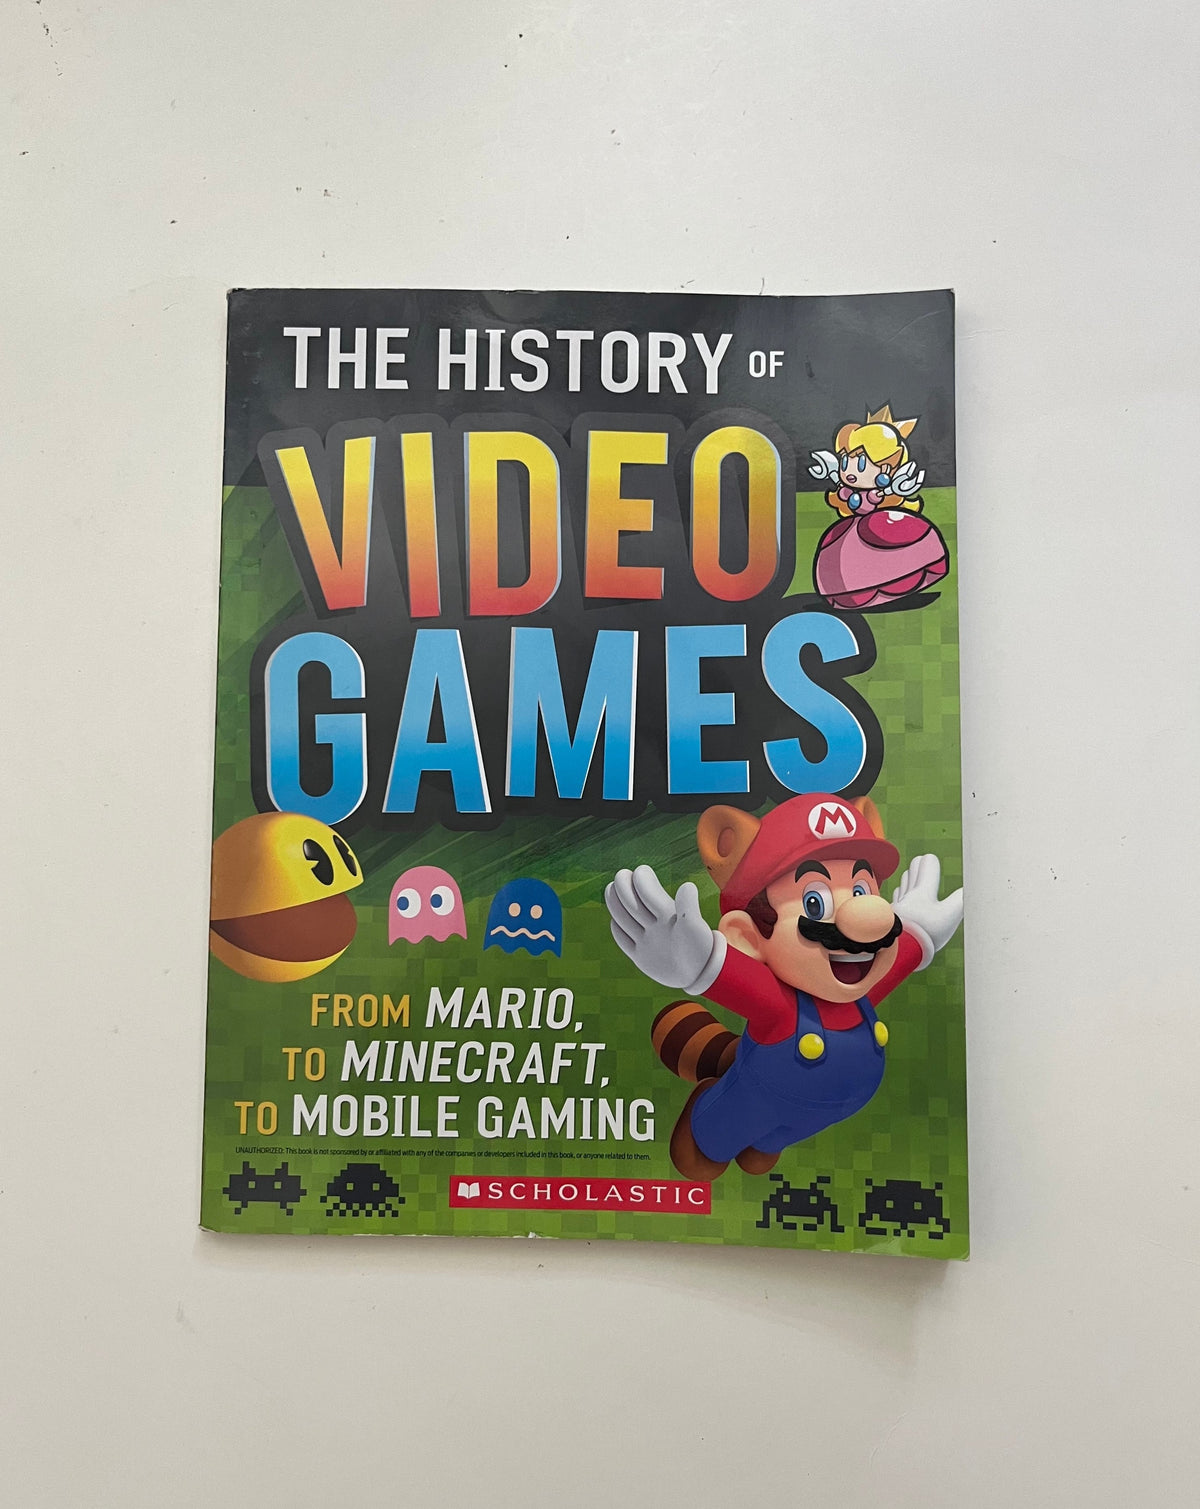 The History of Video Games: From Mario to Minecraft to Mobile Gaming